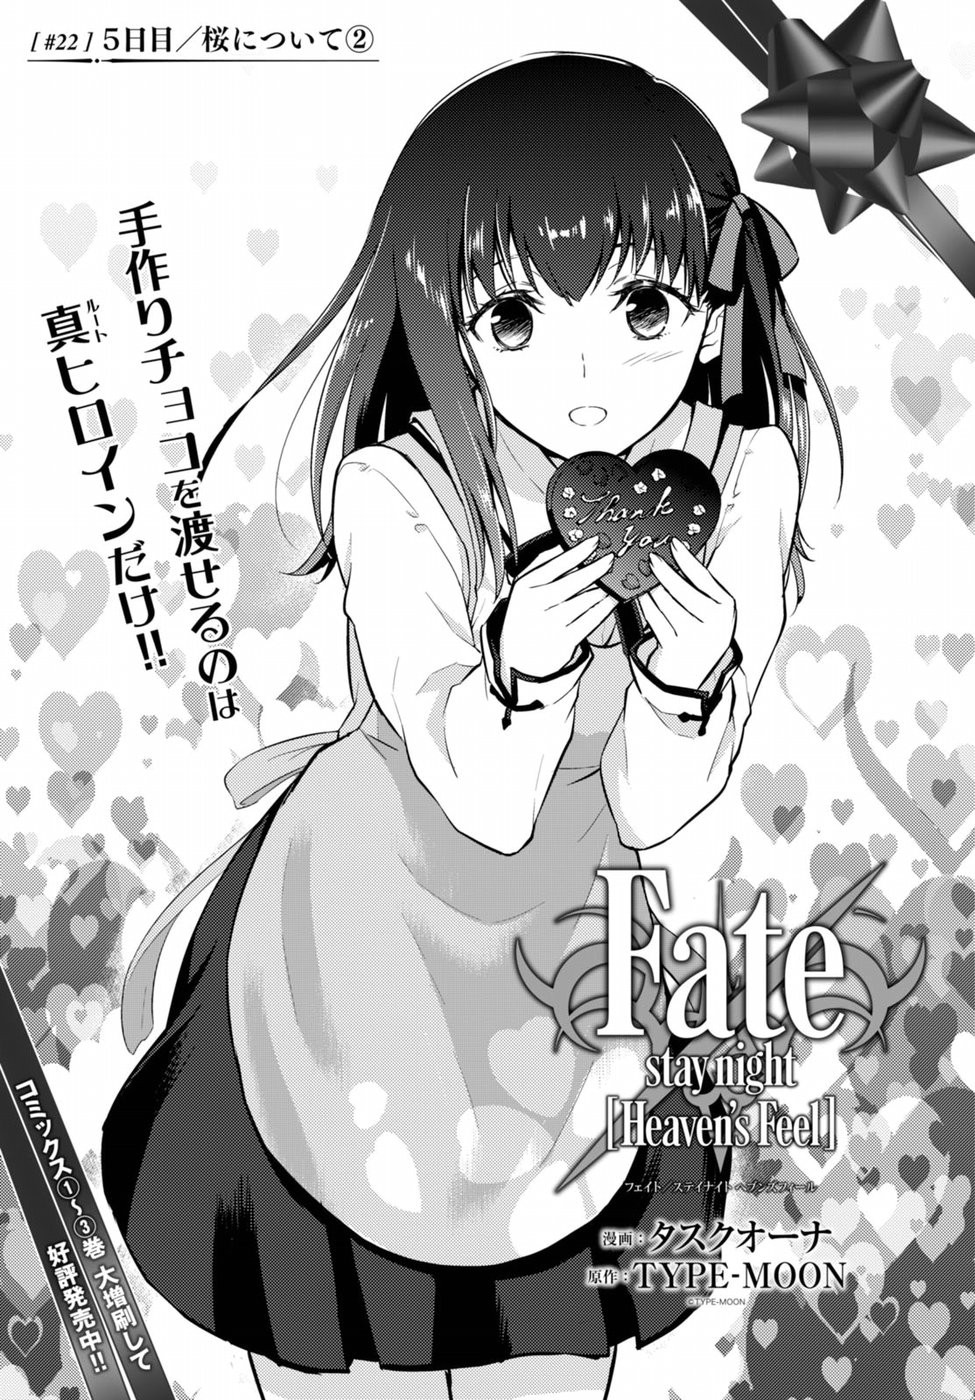 Fate/Stay night Heaven's Feel - Chapter 22 - Page 1